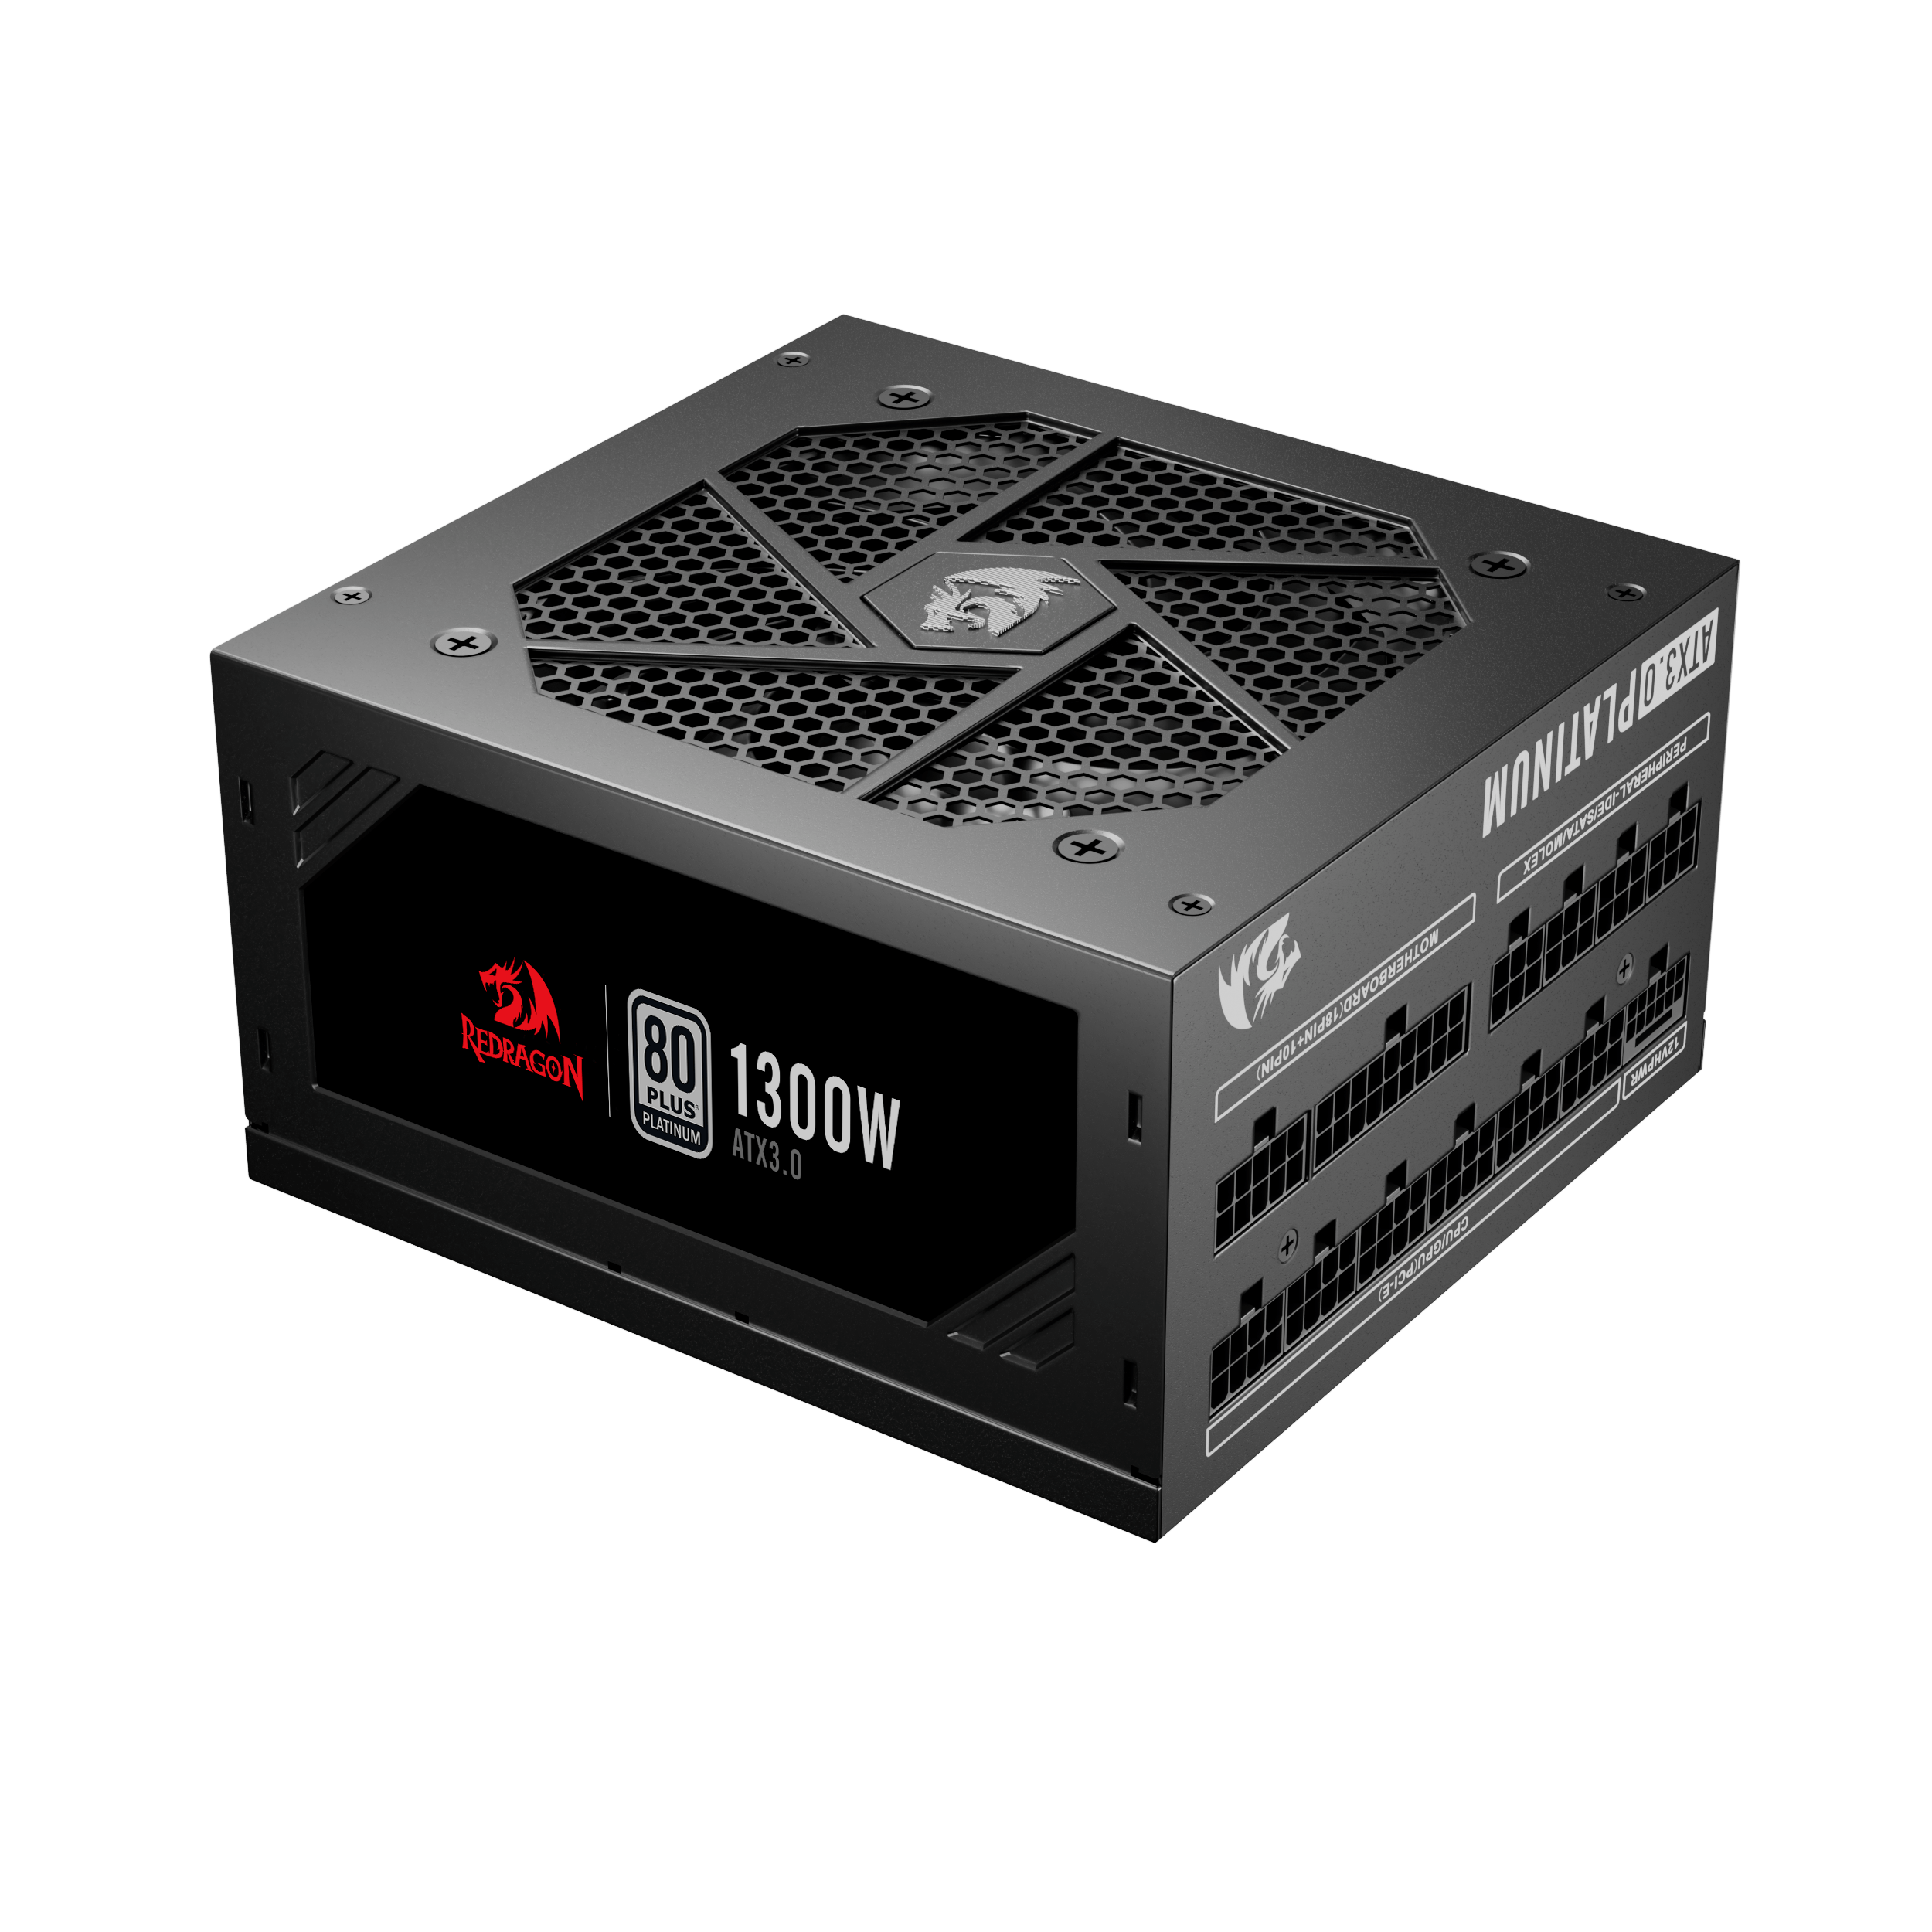  Redragon PSU006 80+ Gold 750 Watt ATX Fully Modular Power  Supply w/ 80 Plus Gold Certified, Compact 160mm Size and Low Noise RGB Fan  0 RPM, 100% Japanese Capacitors, Full Mod Cables, White : Electronics